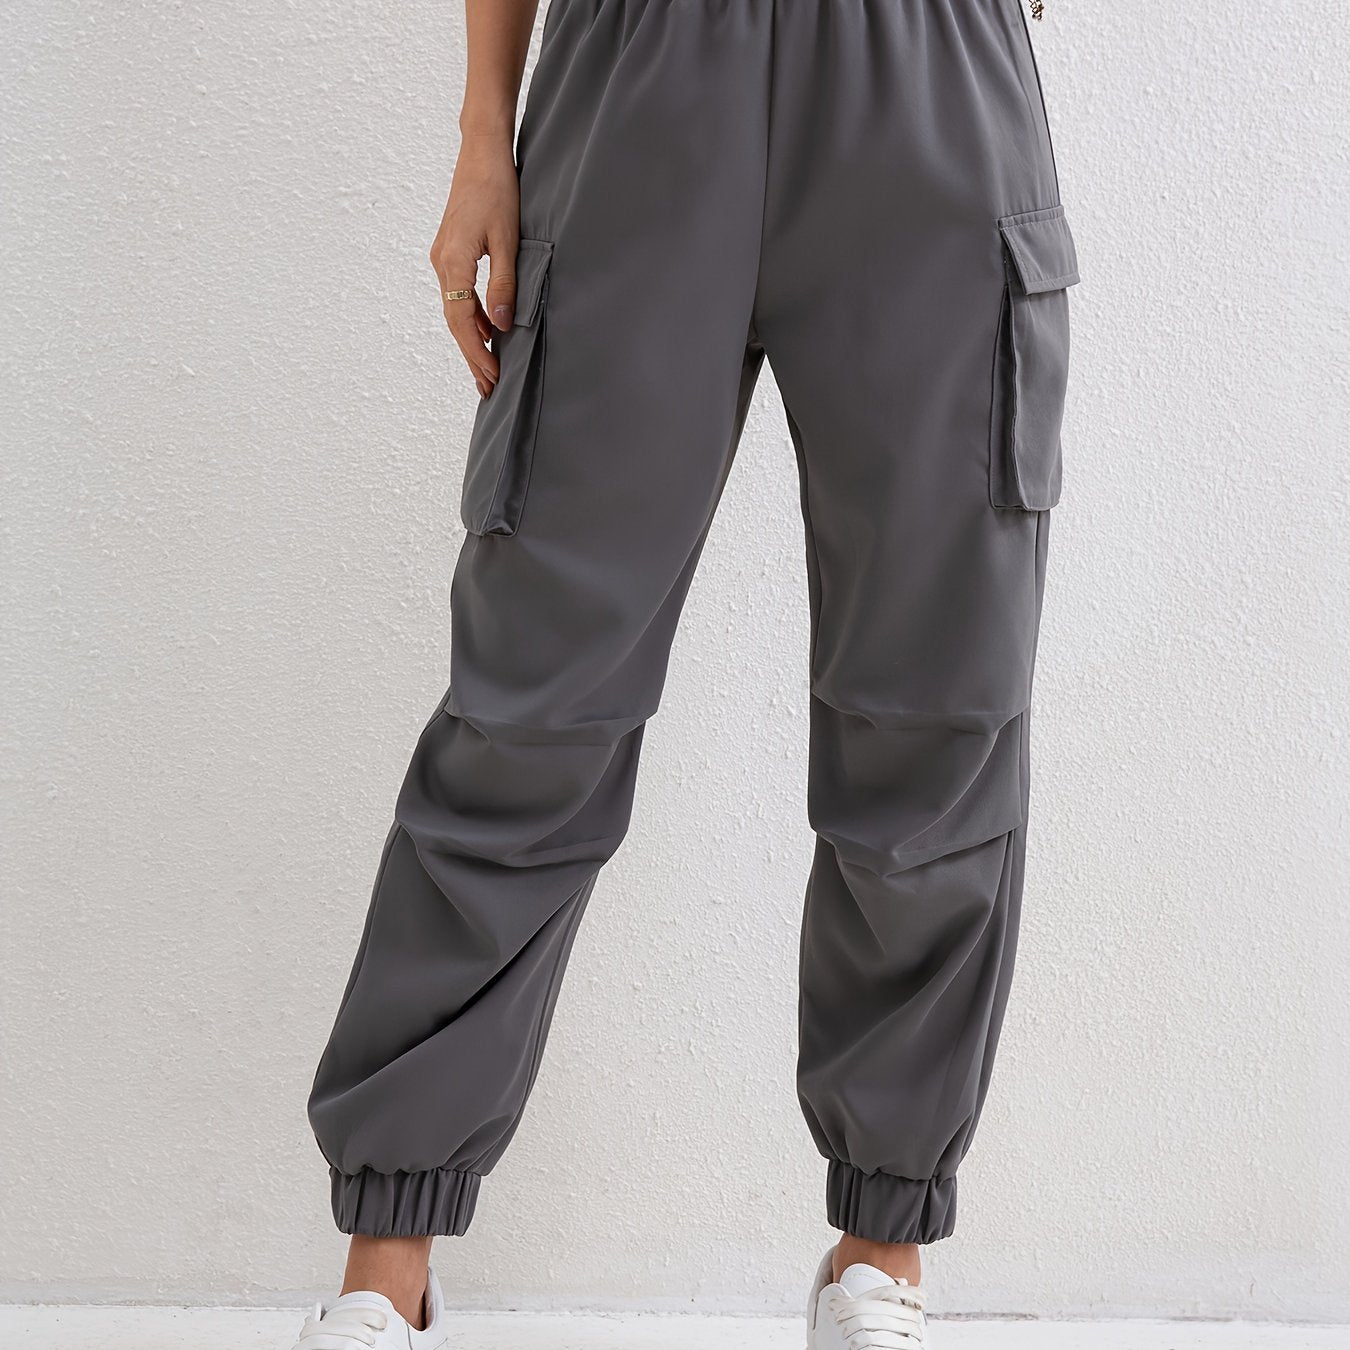 Antmvs Women's Elastic Waist Casual Cargo Joggers Pants With Pockets, Solid Color Pocket Running Overalls, Women's Athleisure